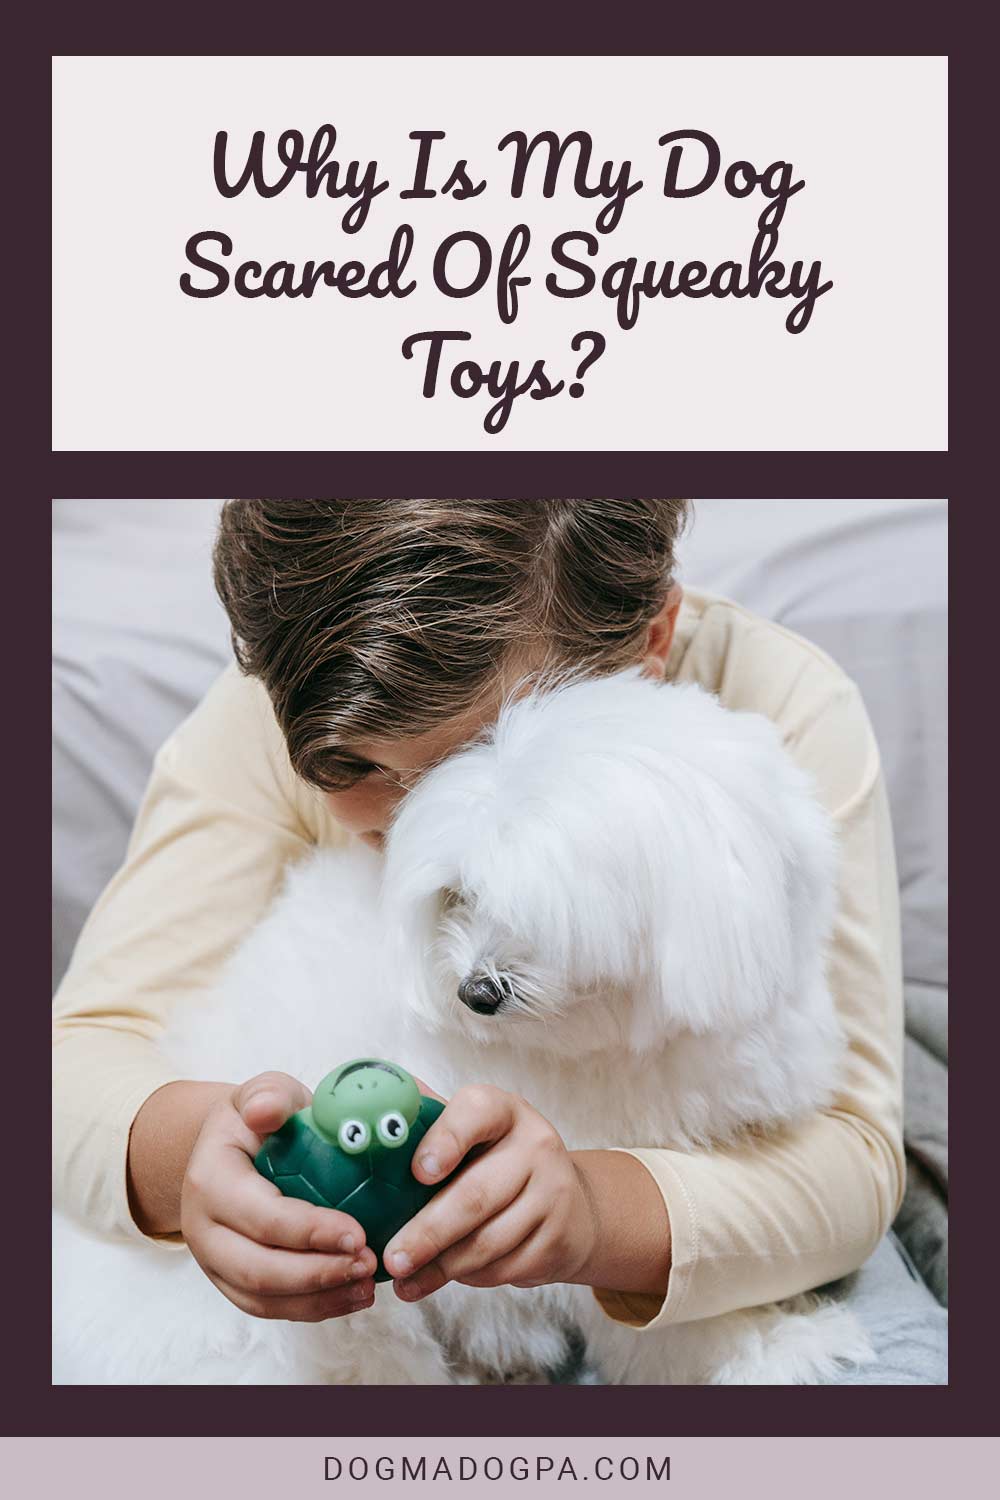 Why Is My Dog Scared Of Squeaky Toys?